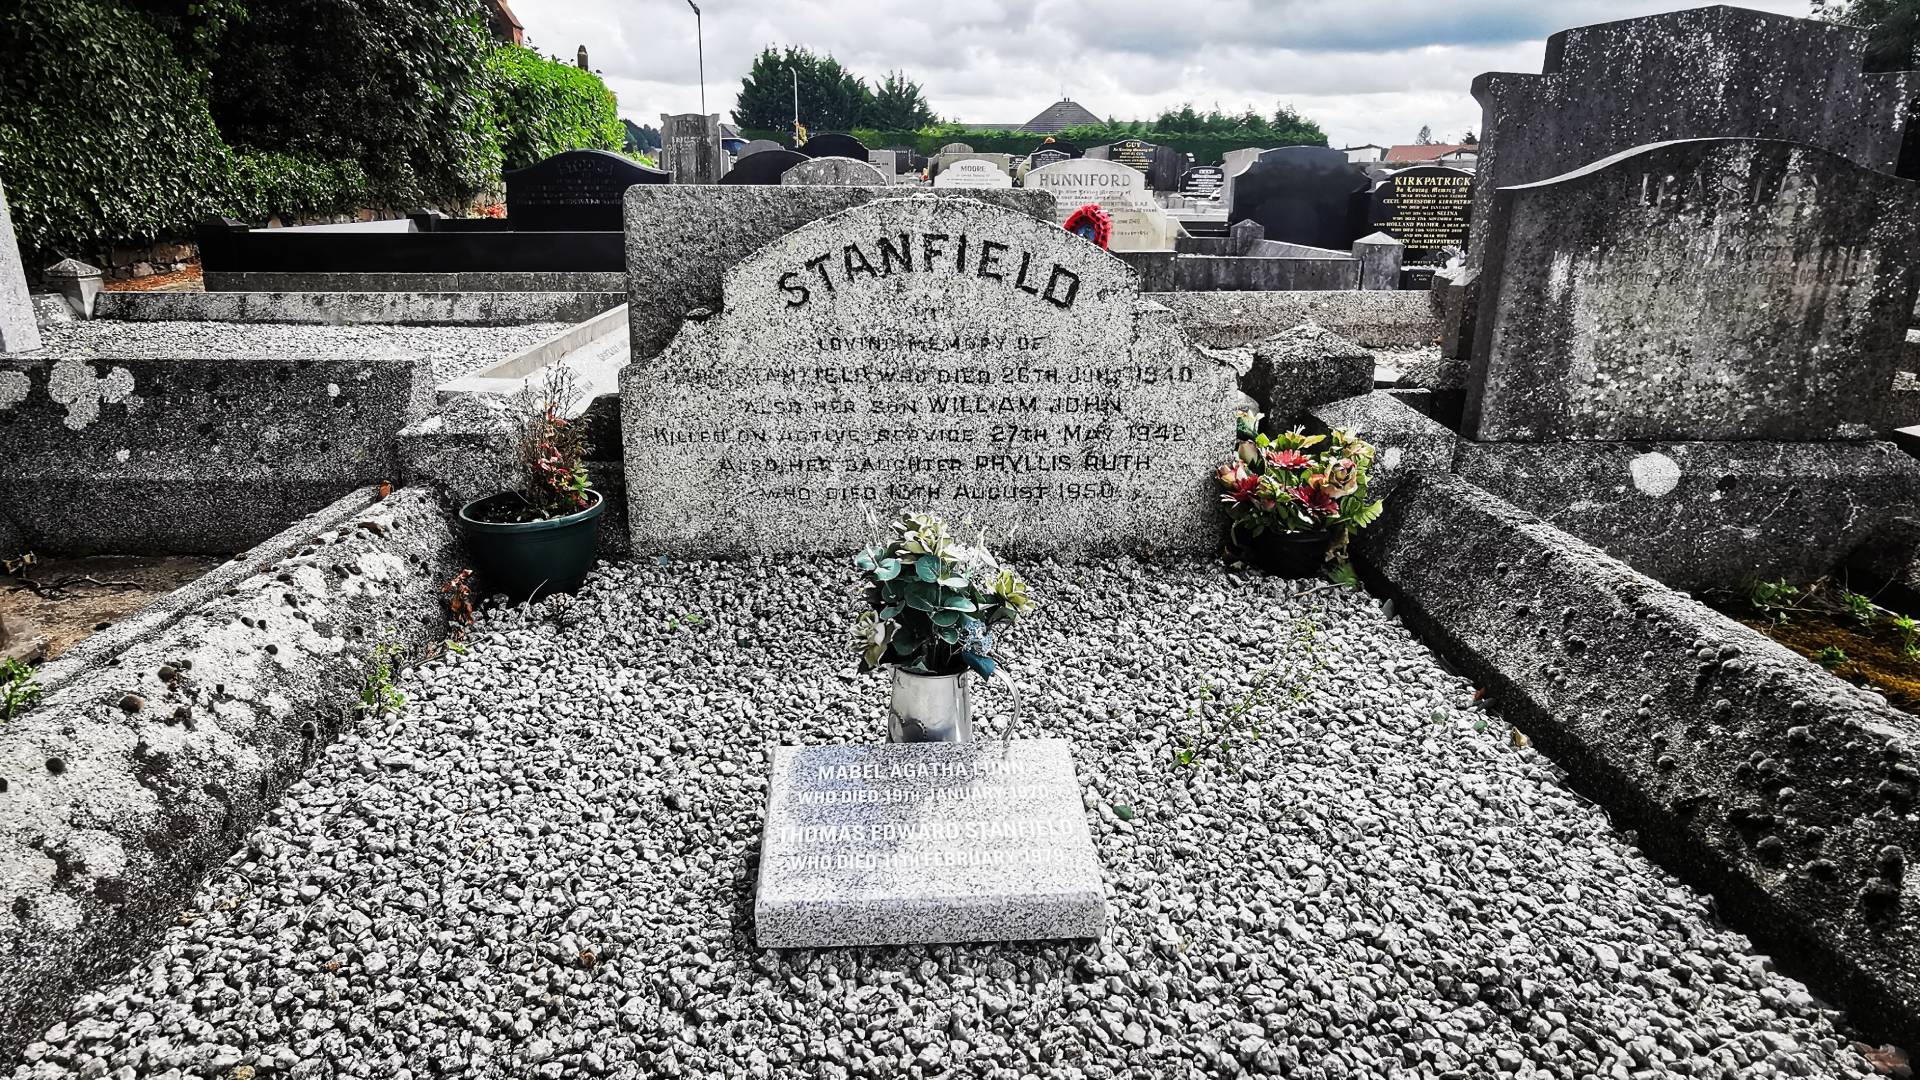 A family memorial commemorates Gunner William John Stanfield in Seagoe (St. Gobhan's) Church of Ireland Churchyard, Portadown, Co. Armagh.